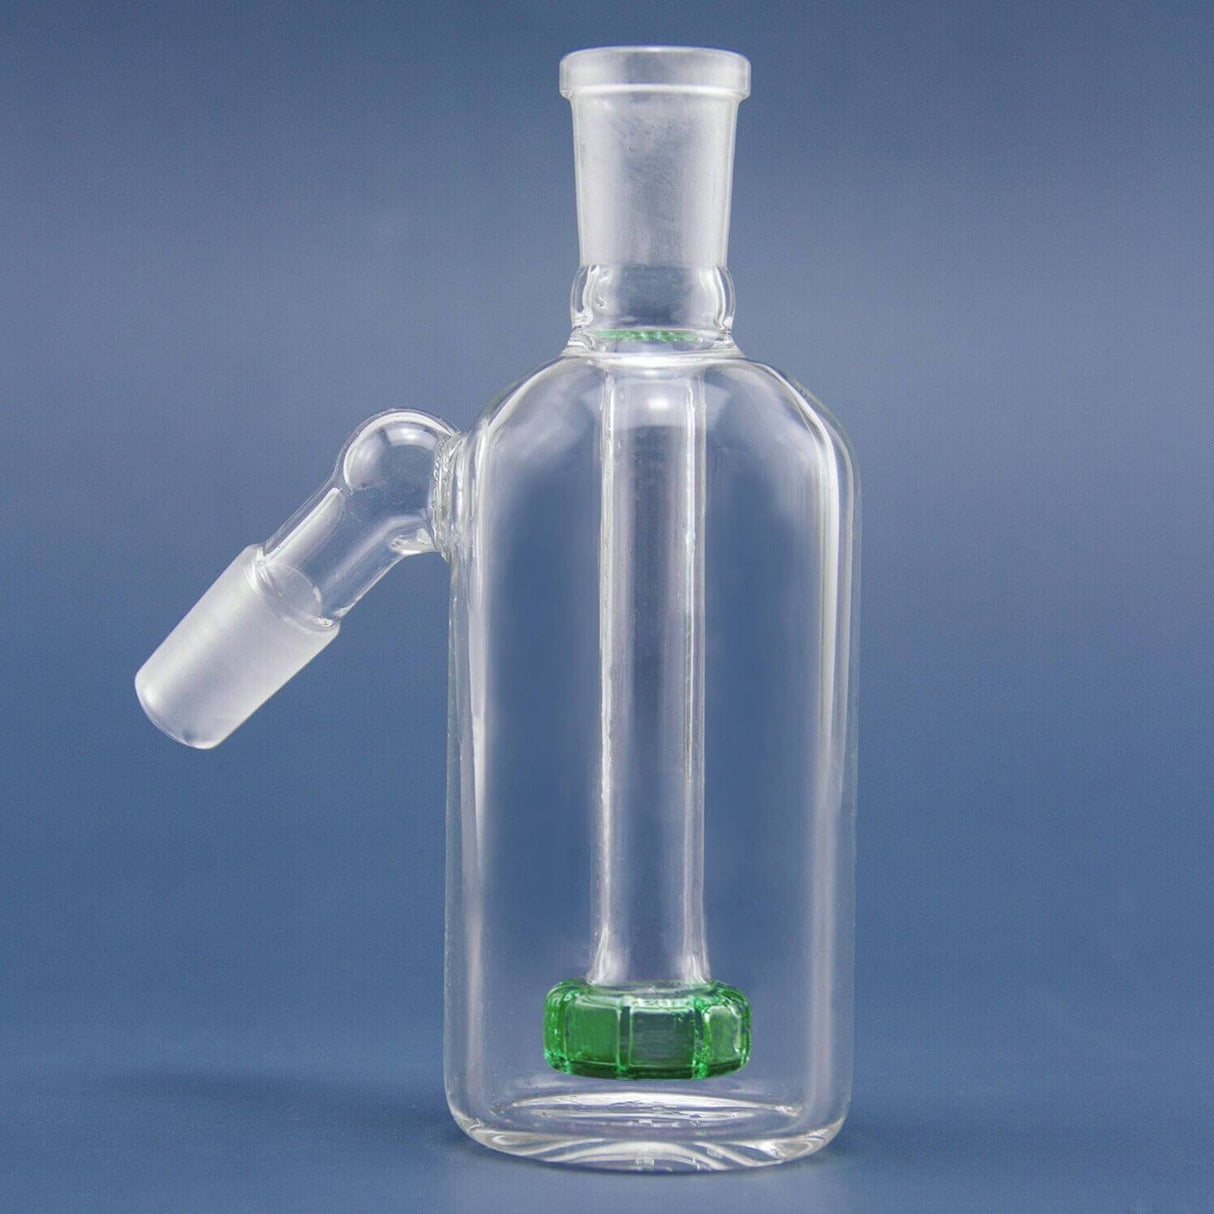 Pilot Diary Ash Catcher with Green Percolator 14mm, Front View on Blue Background